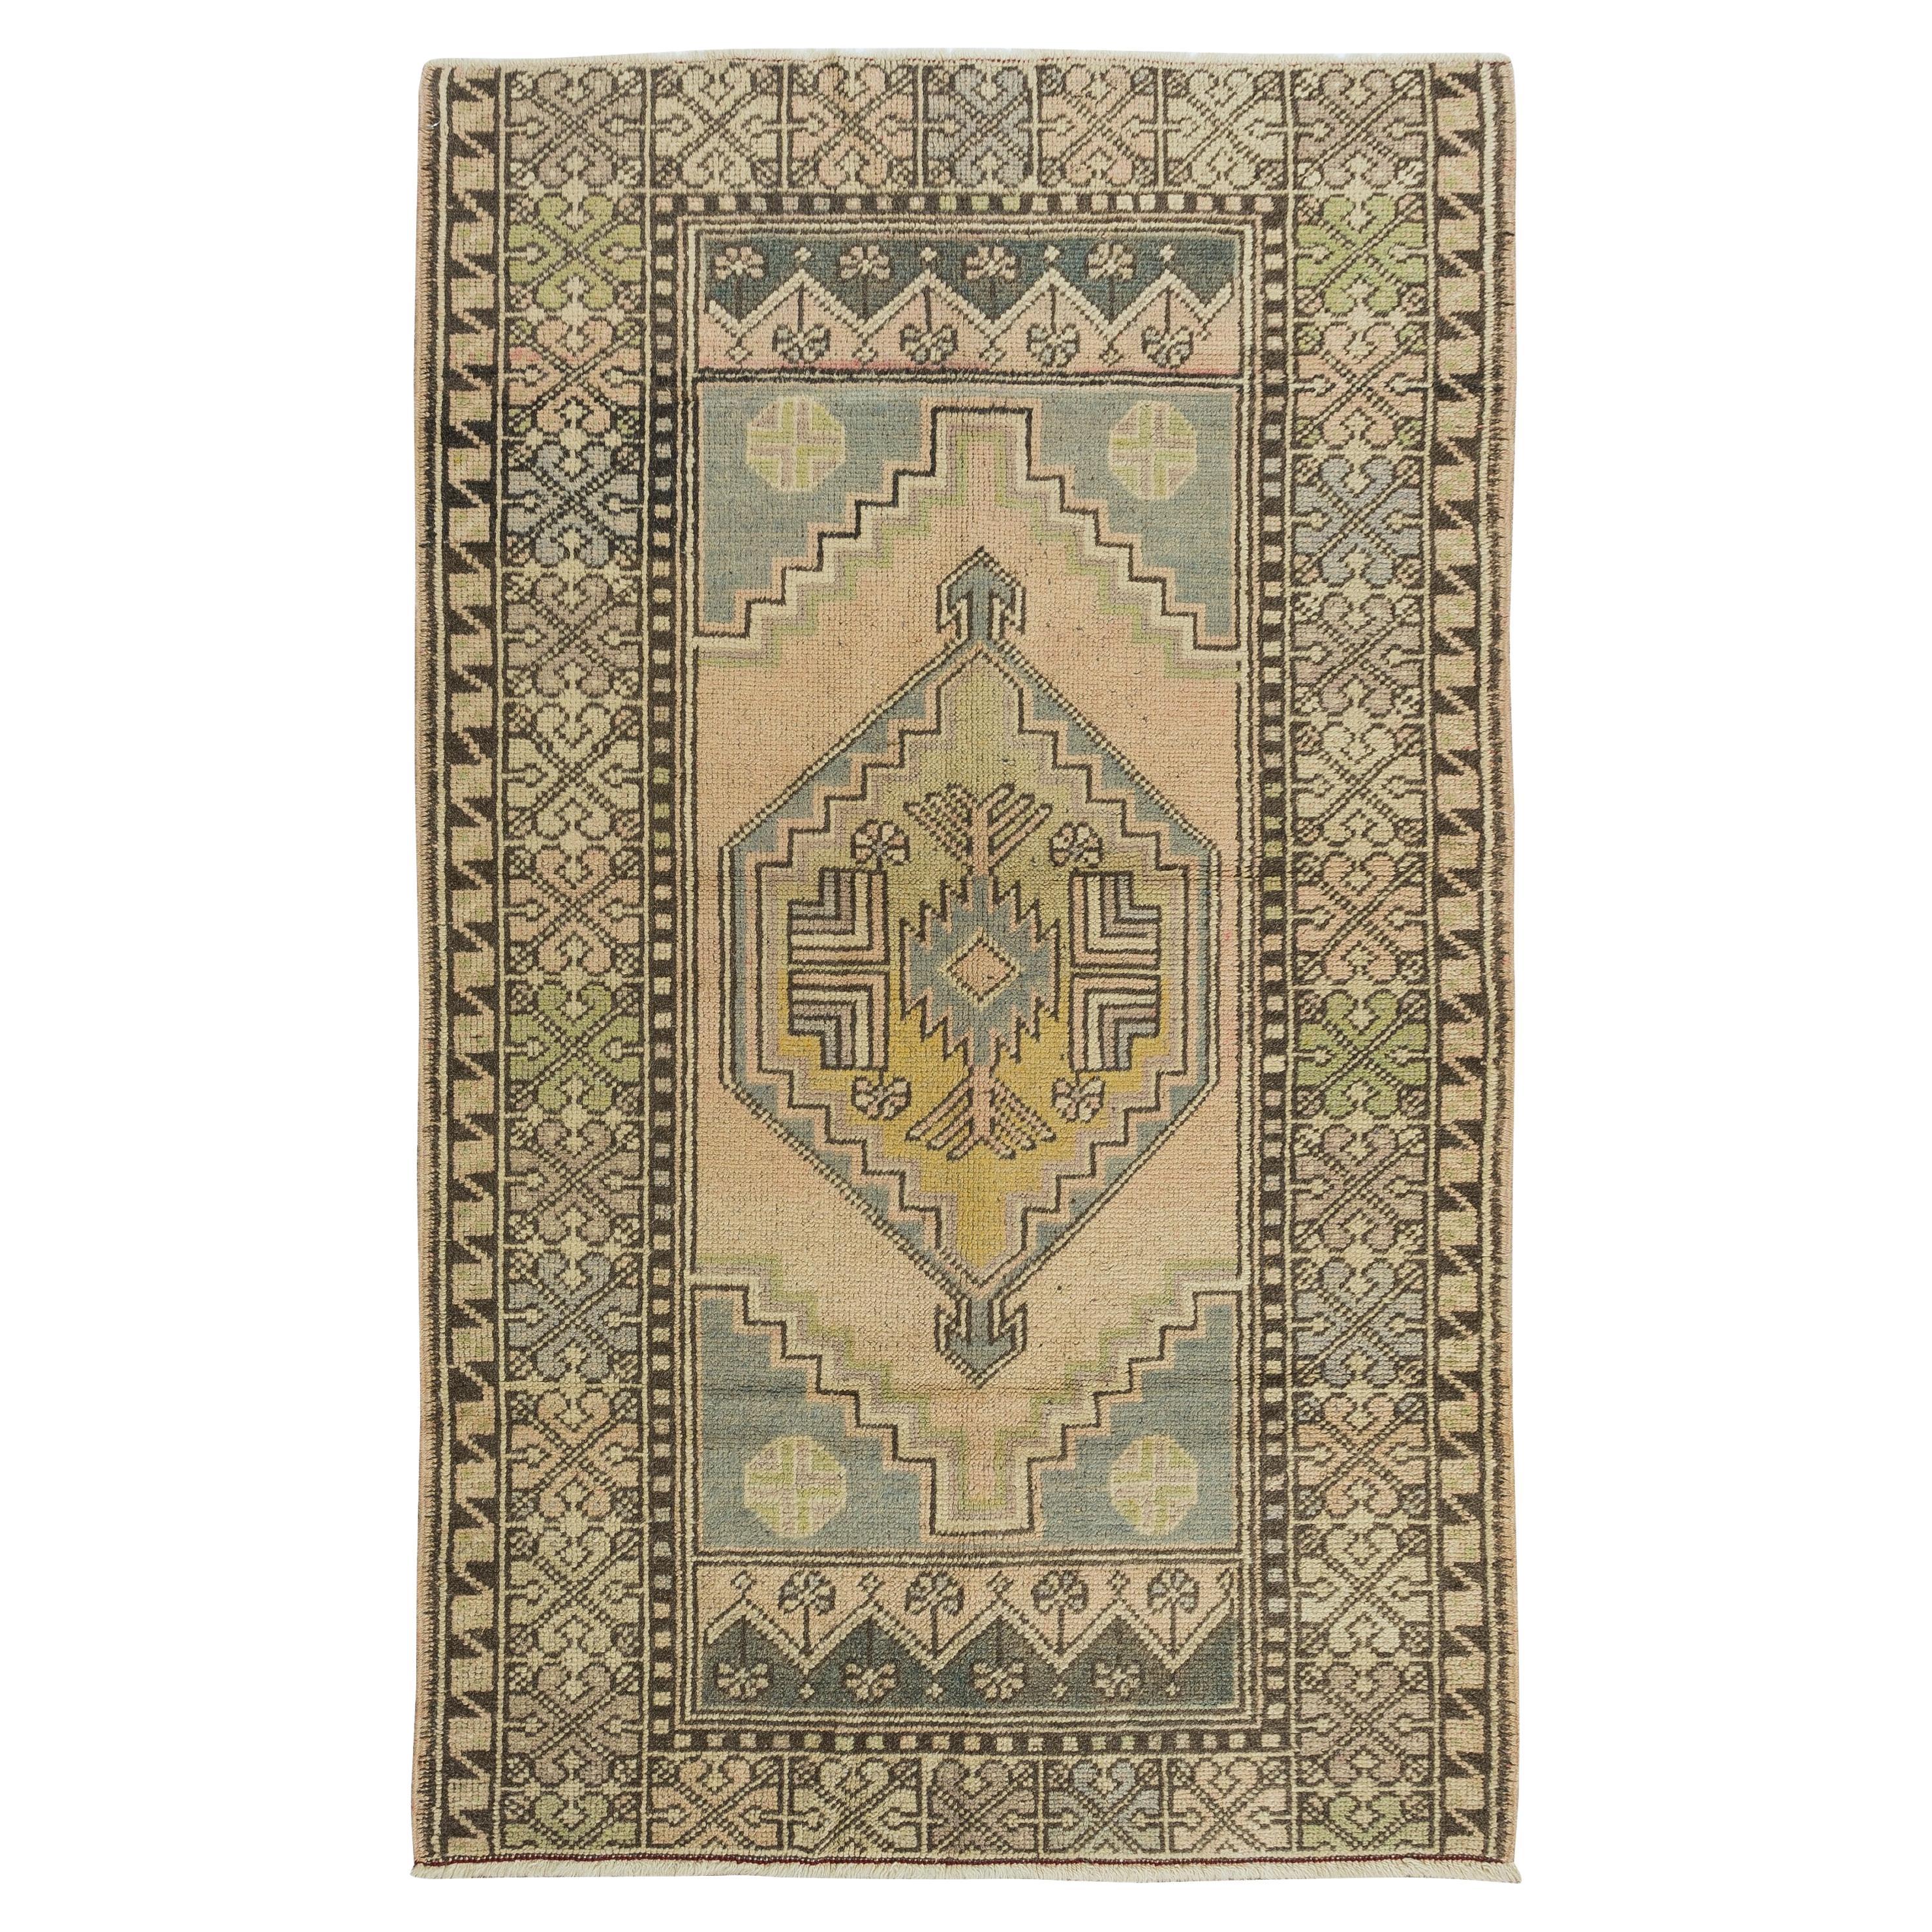 3.3x5.6 Ft 20th-Century Oriental Accent Rug. Handmade Carpet with Tribal Style